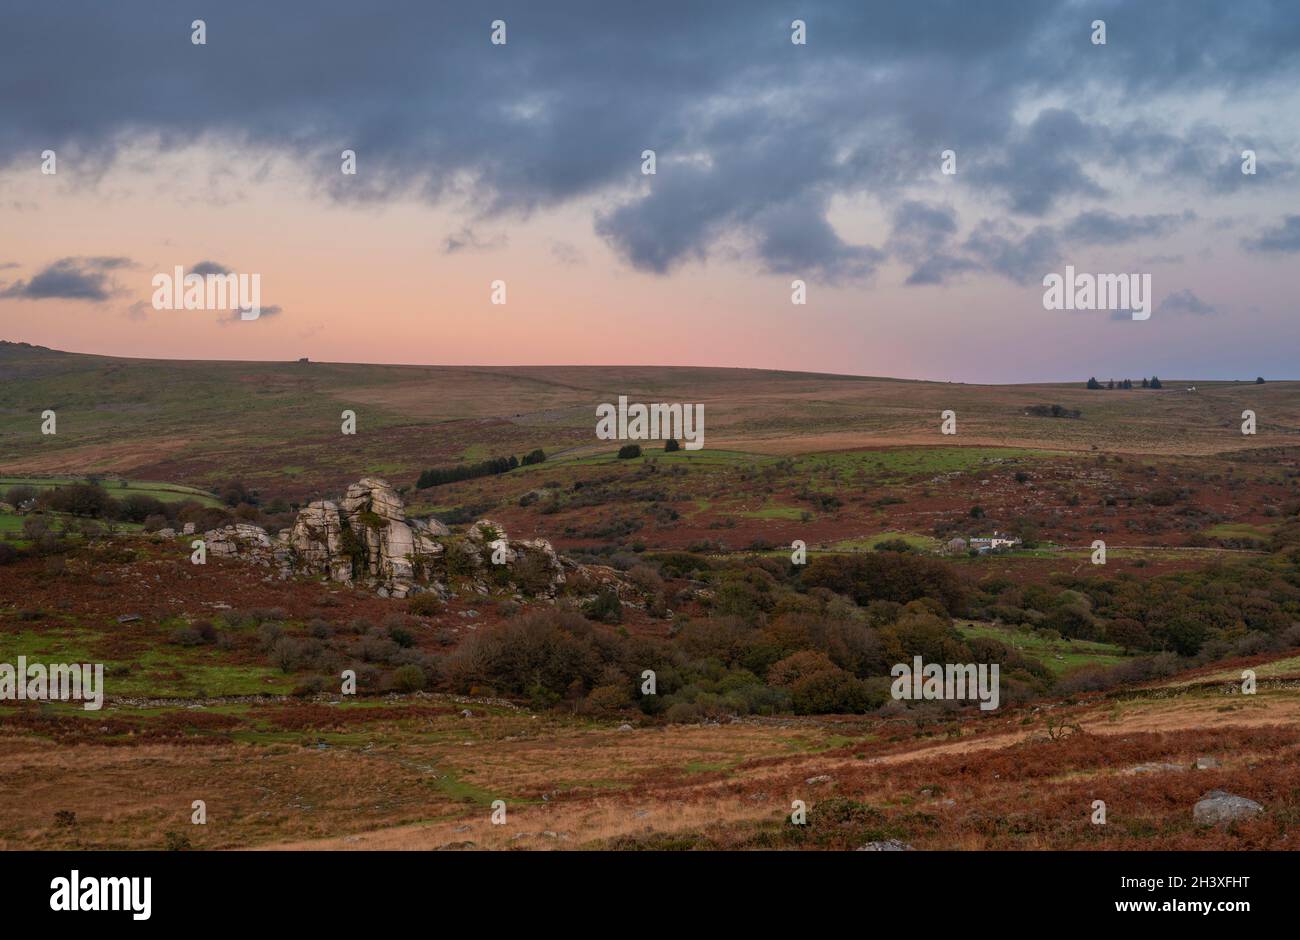 Dartmoor, Devon, UK. 30th Oct, 2021. UK Weather: Following a week of torential rain, the sky clears over Dartmoor revealing vibrant autumnal colours emerging in the rugged moorland. Image shot from the West of the National Park near Heckwood Tor looking out towards Vixen Tor at sunset. Credit: PQ/Alamy Live News Stock Photo